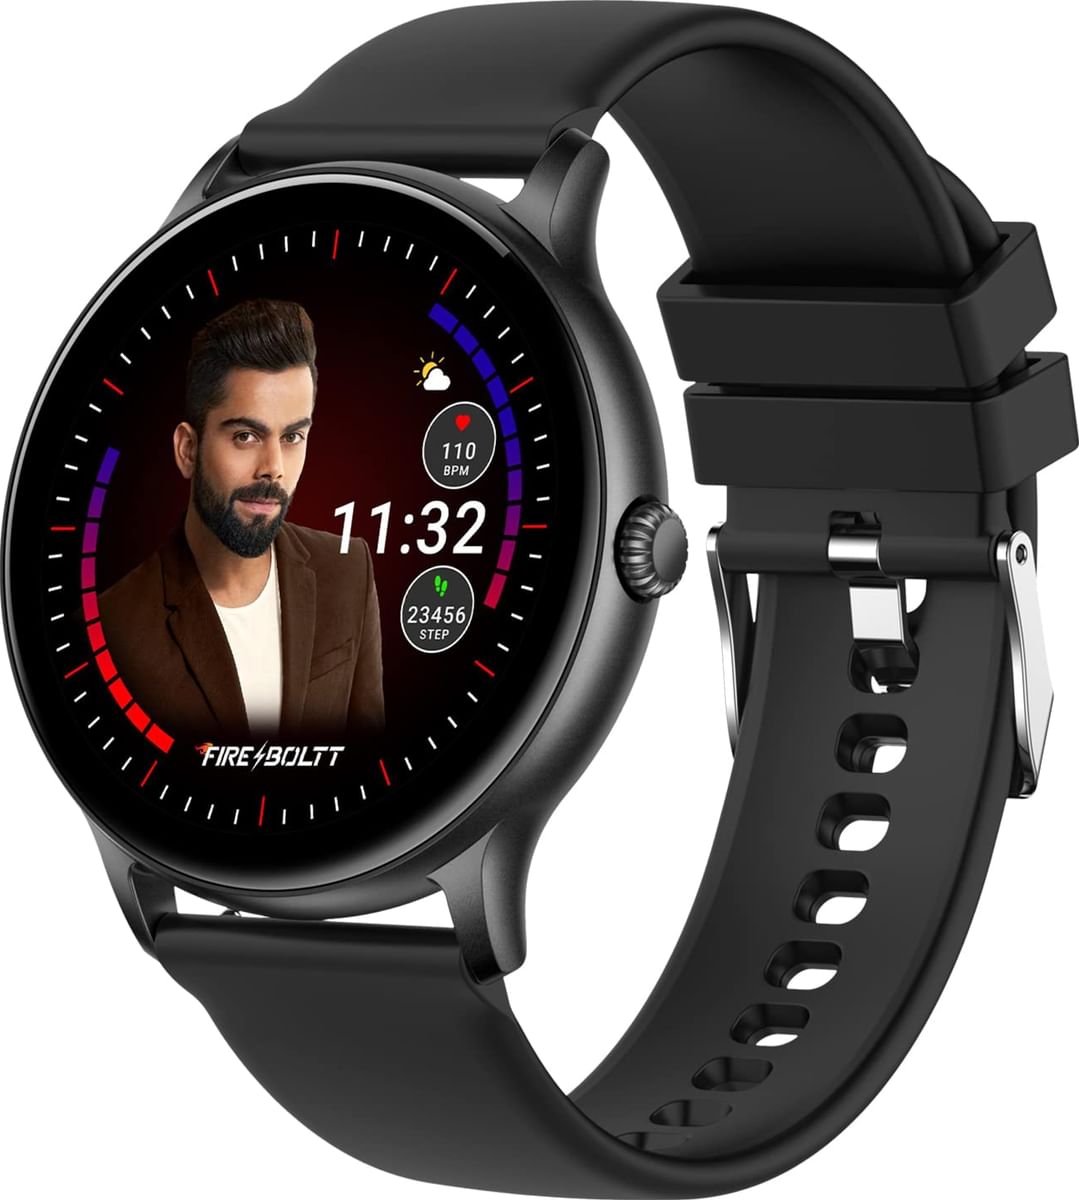 इन Smartwatches से आपको मिलेगा कंप्लीट क्लासी लुक, जान लीजिए फीचर्स और लुक, फिर …-You will get complete classy look from these Smartwatches, know the features and look, then …